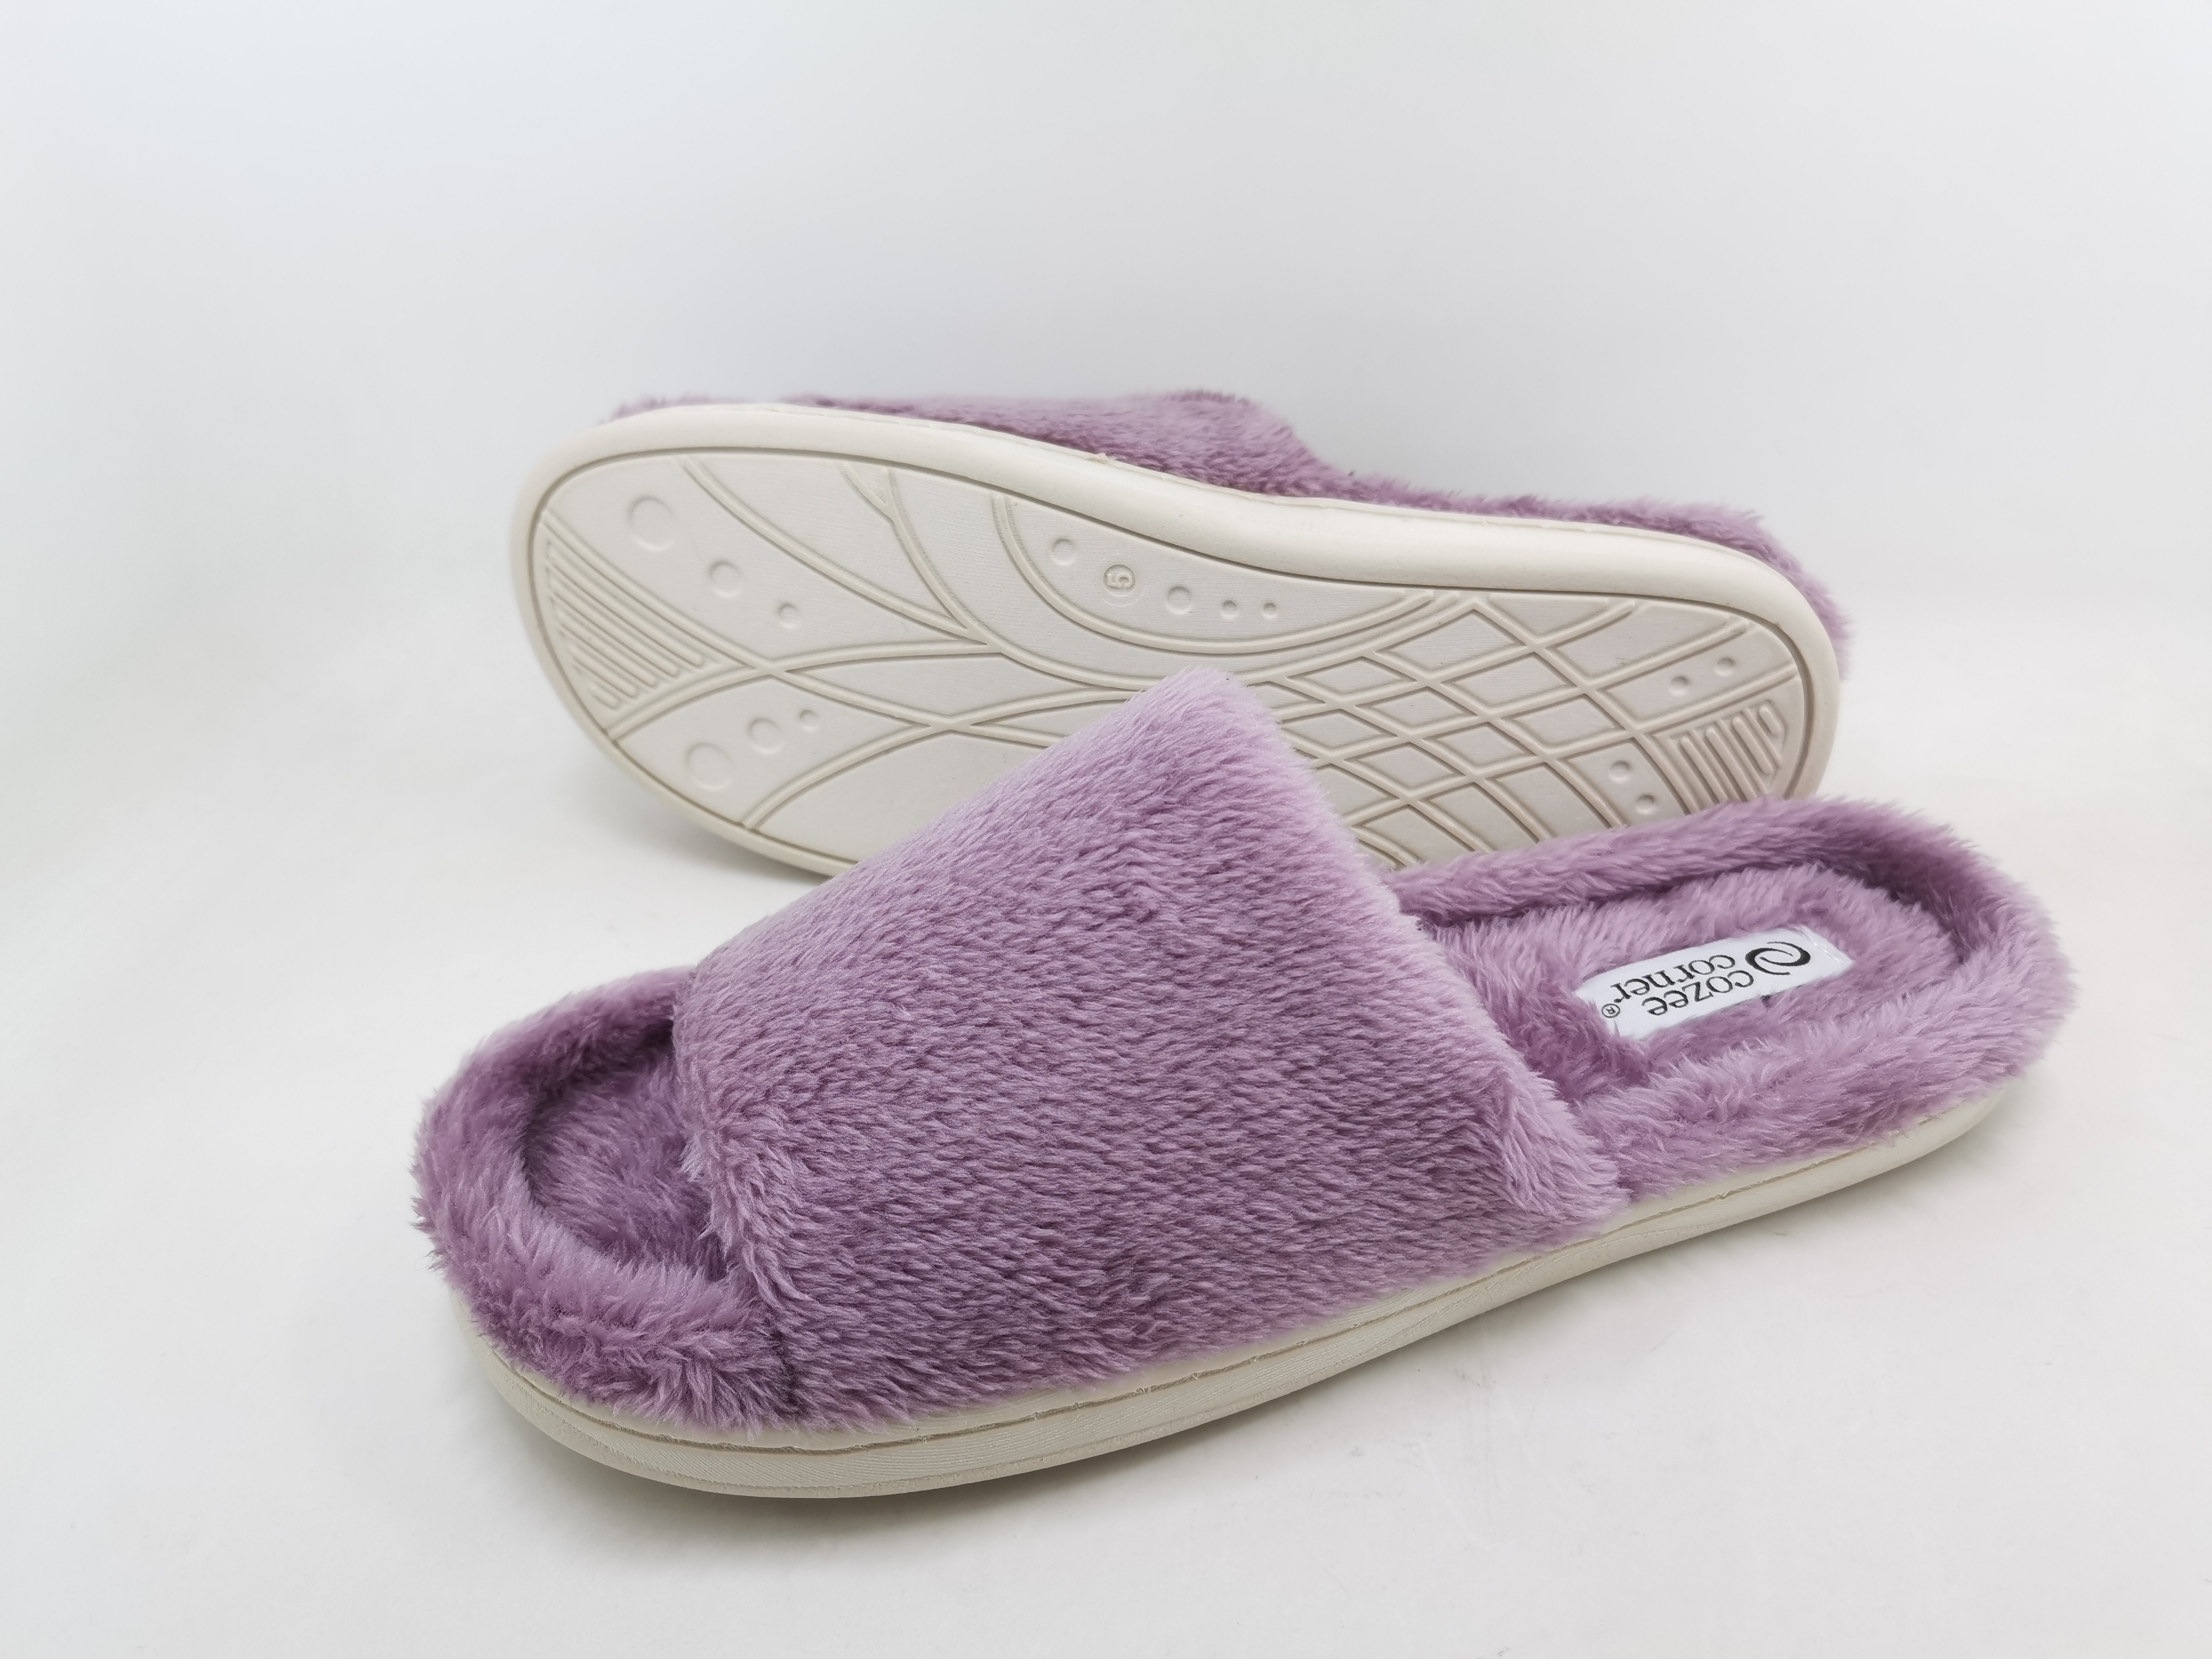 Women's Open Toe House Slippers Memory Foam, Comfy Cozy Slip-on Indoor Slippers for Women Non-Slip, Soft Cute Womens Flannel Home Bedroom Scuff Slippers